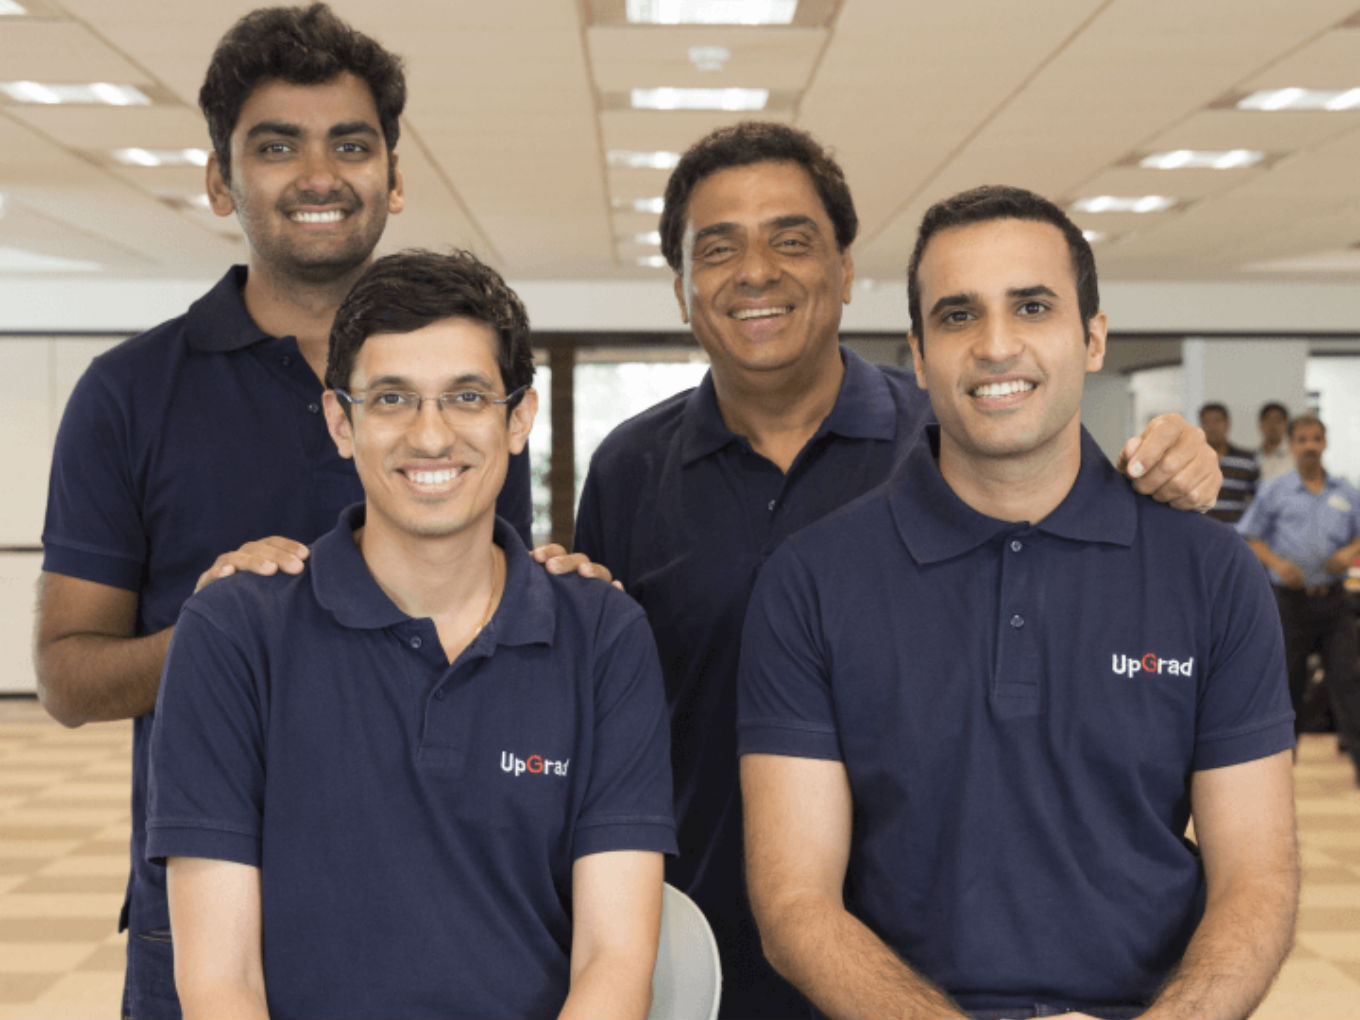 Edtech startup UpGrad Acquires Acadview, Increases Focus On Upskilling Working Professionals